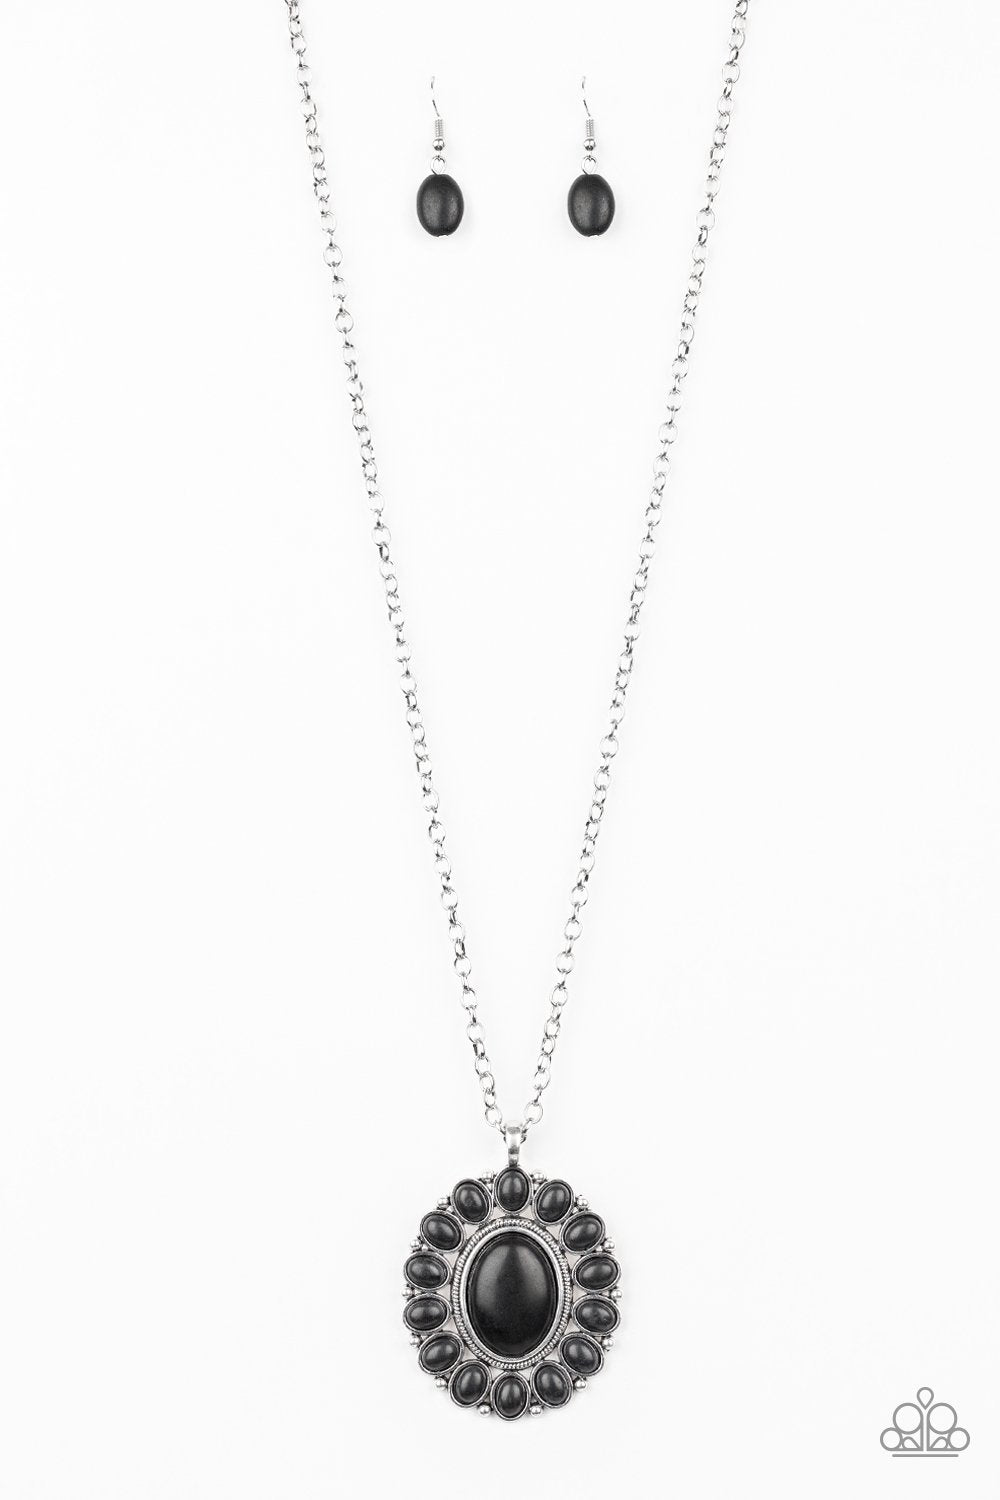 Rancho Roamer Black Stone Necklace - Paparazzi Accessories-CarasShop.com - $5 Jewelry by Cara Jewels